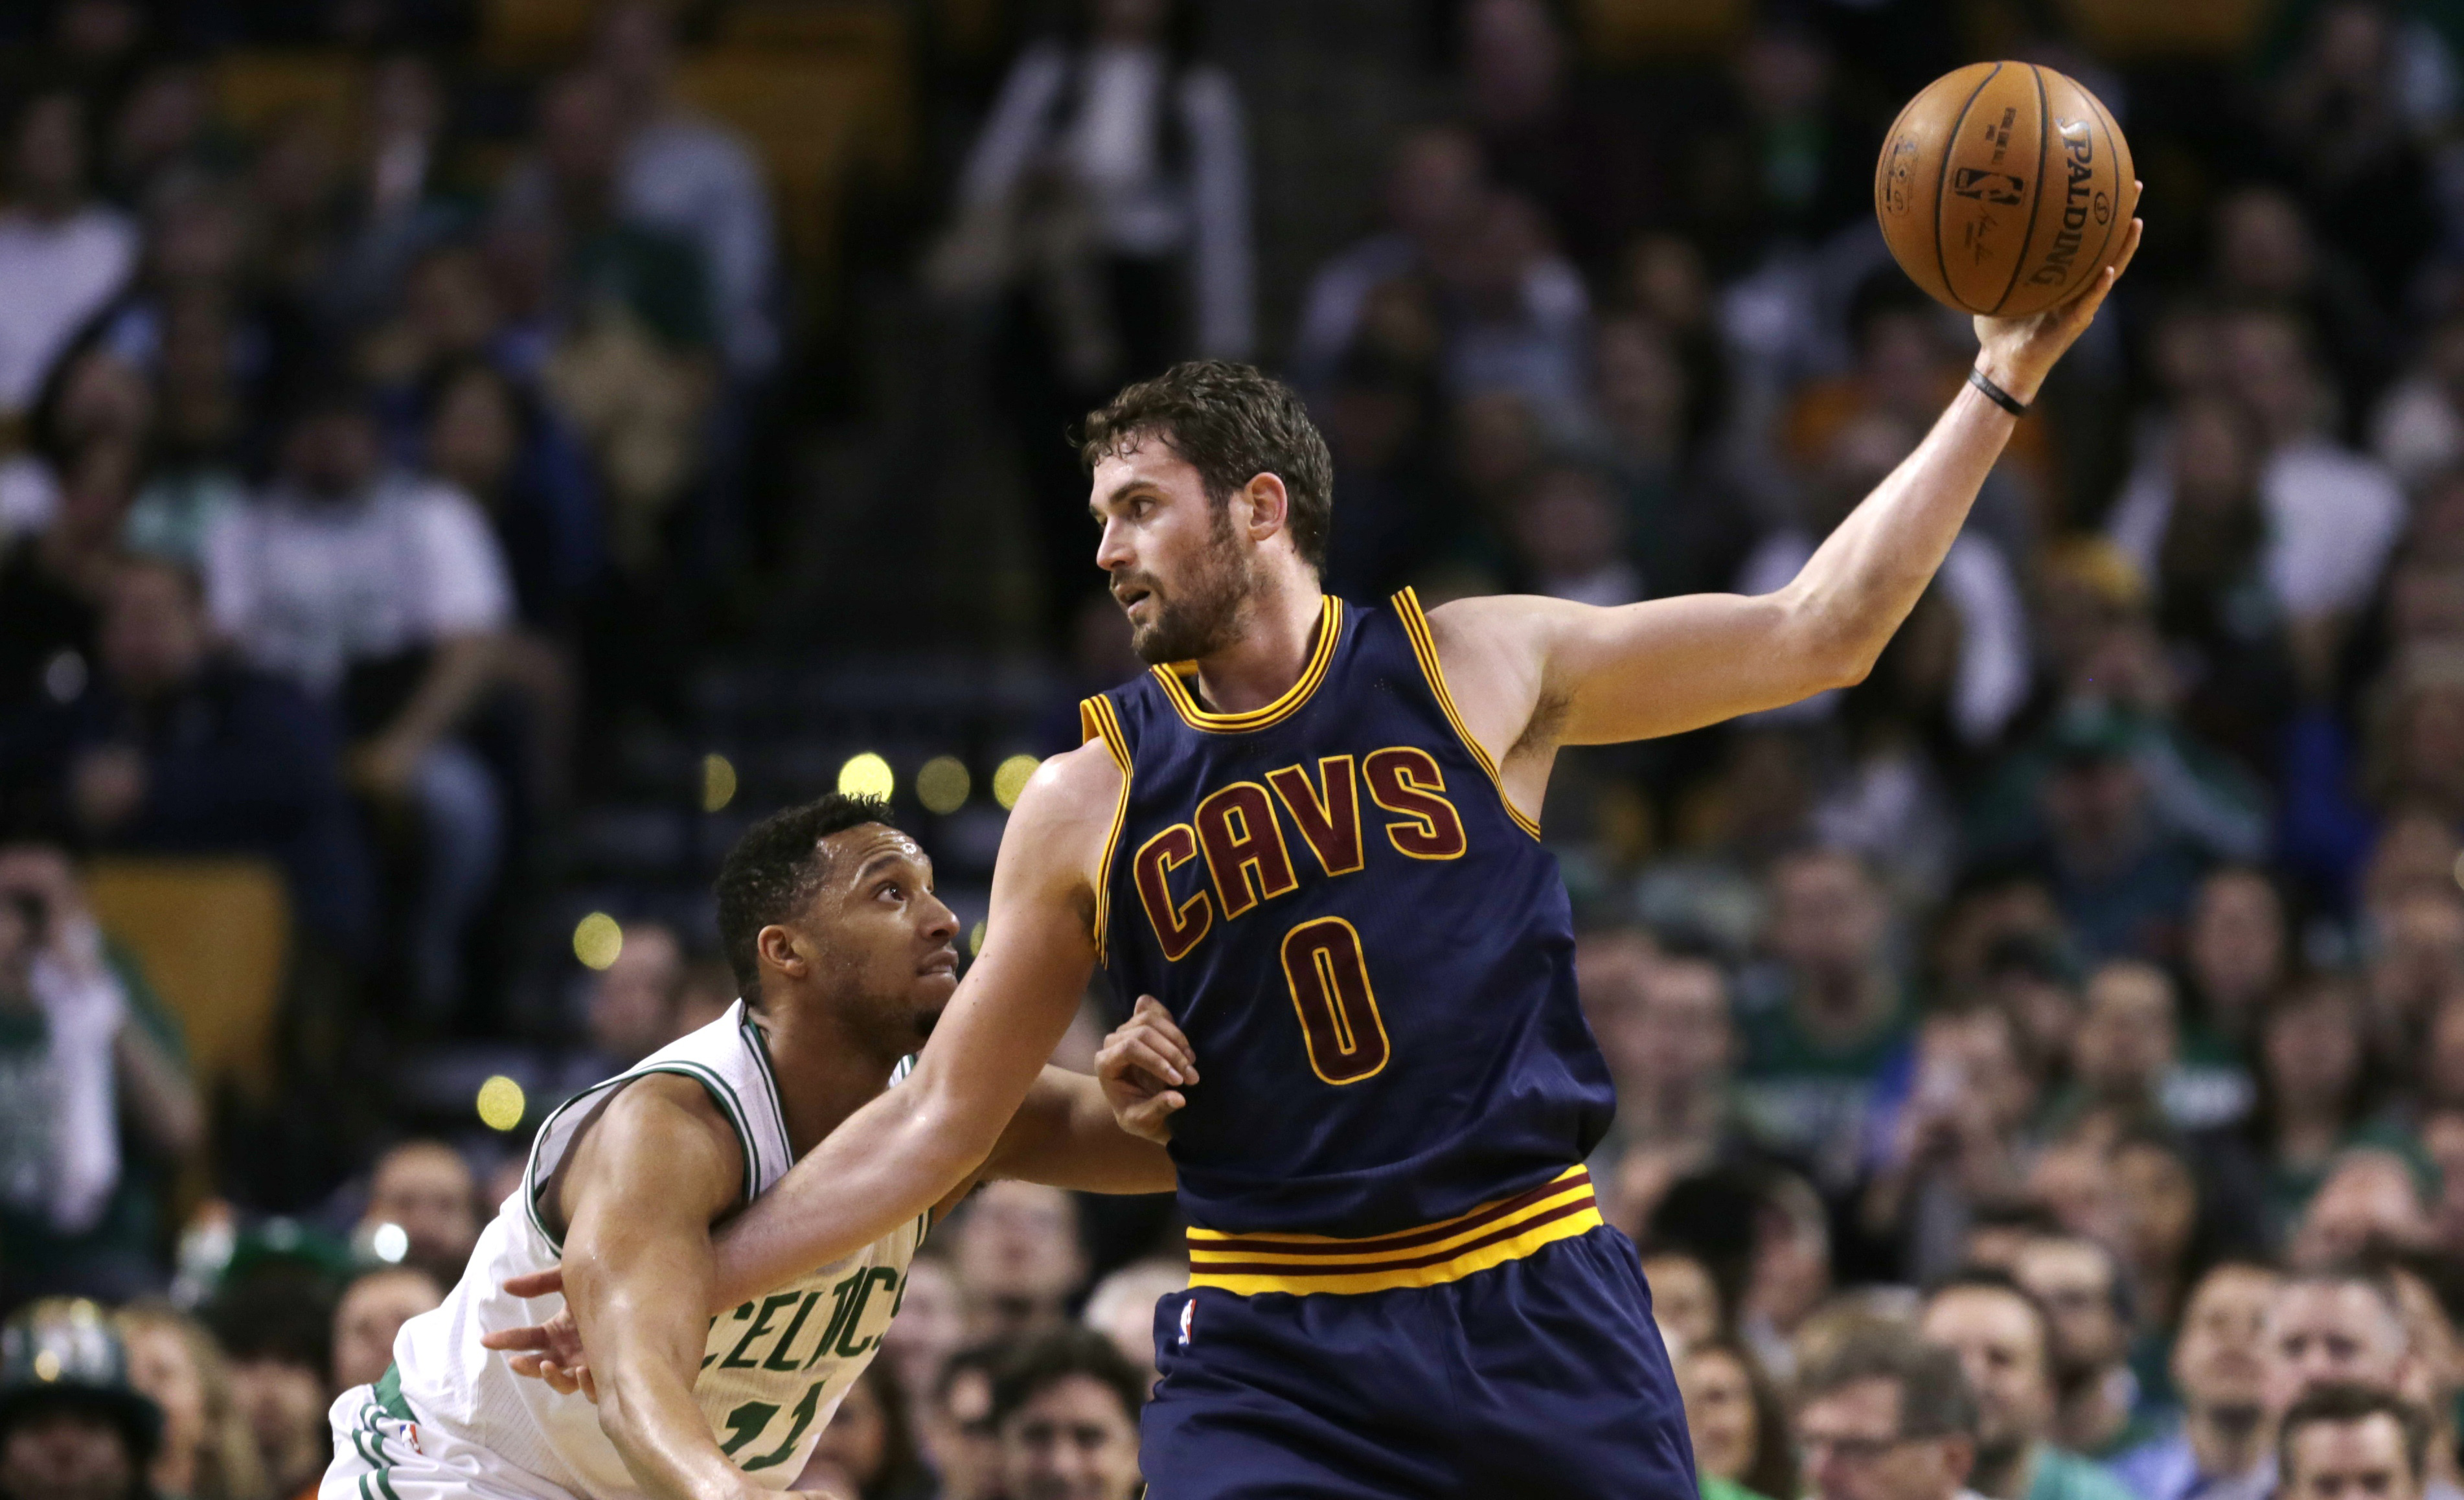 Cleveland Cavaliers: What should we expect from Kevin Love?